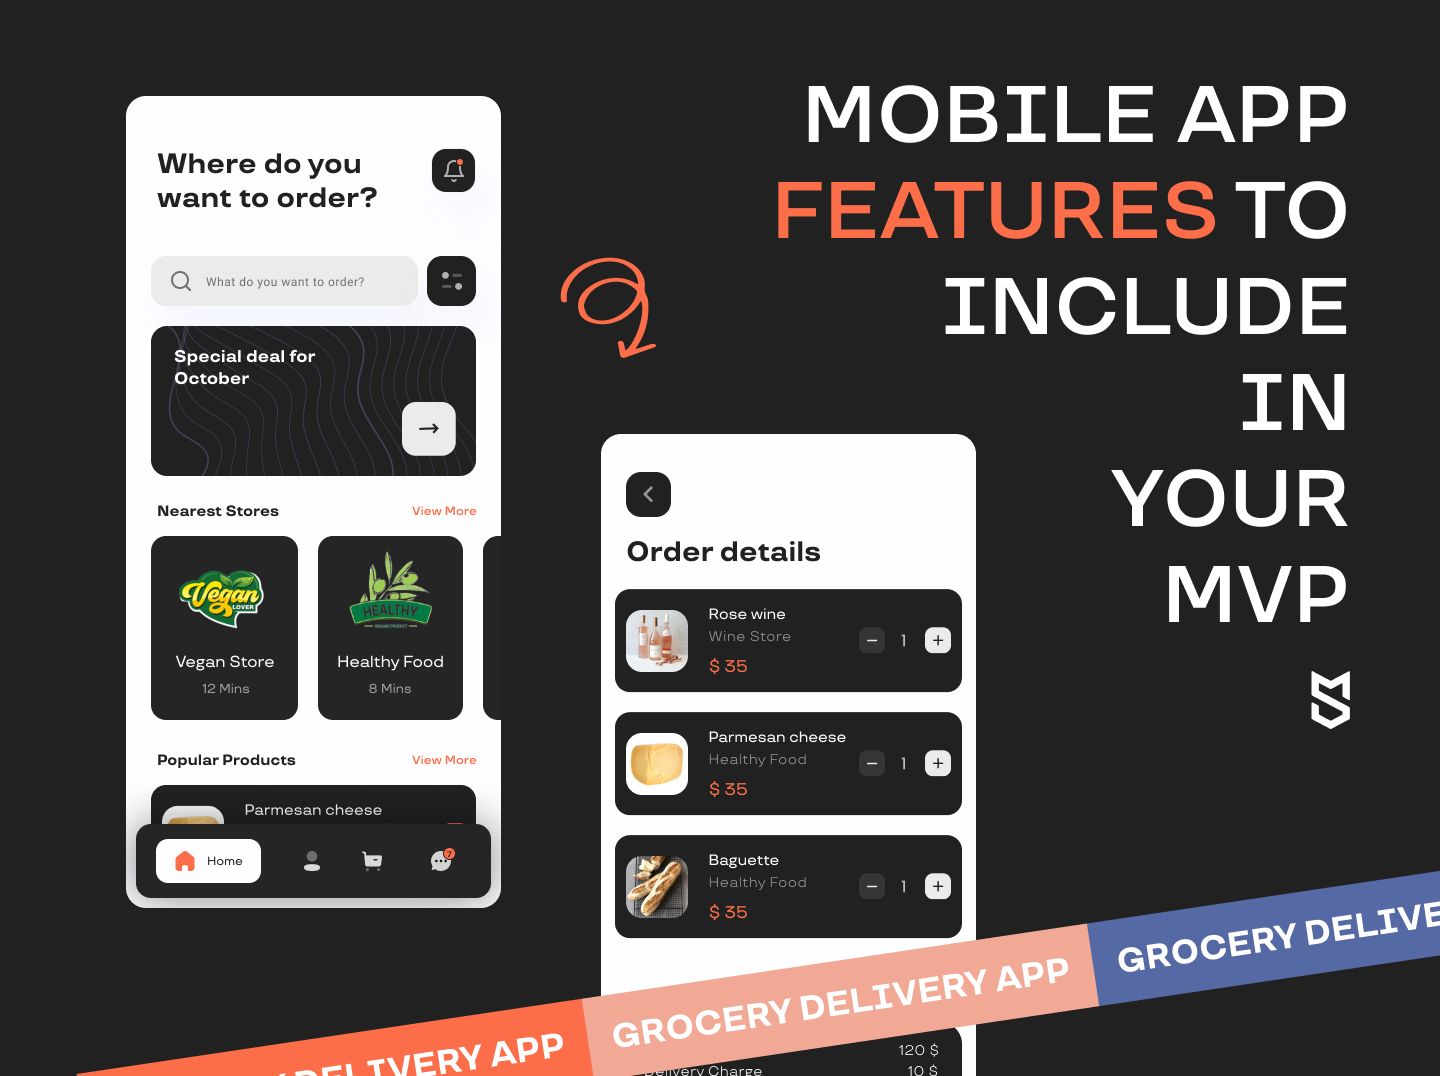 Grocery mobile app features to include in your MVP